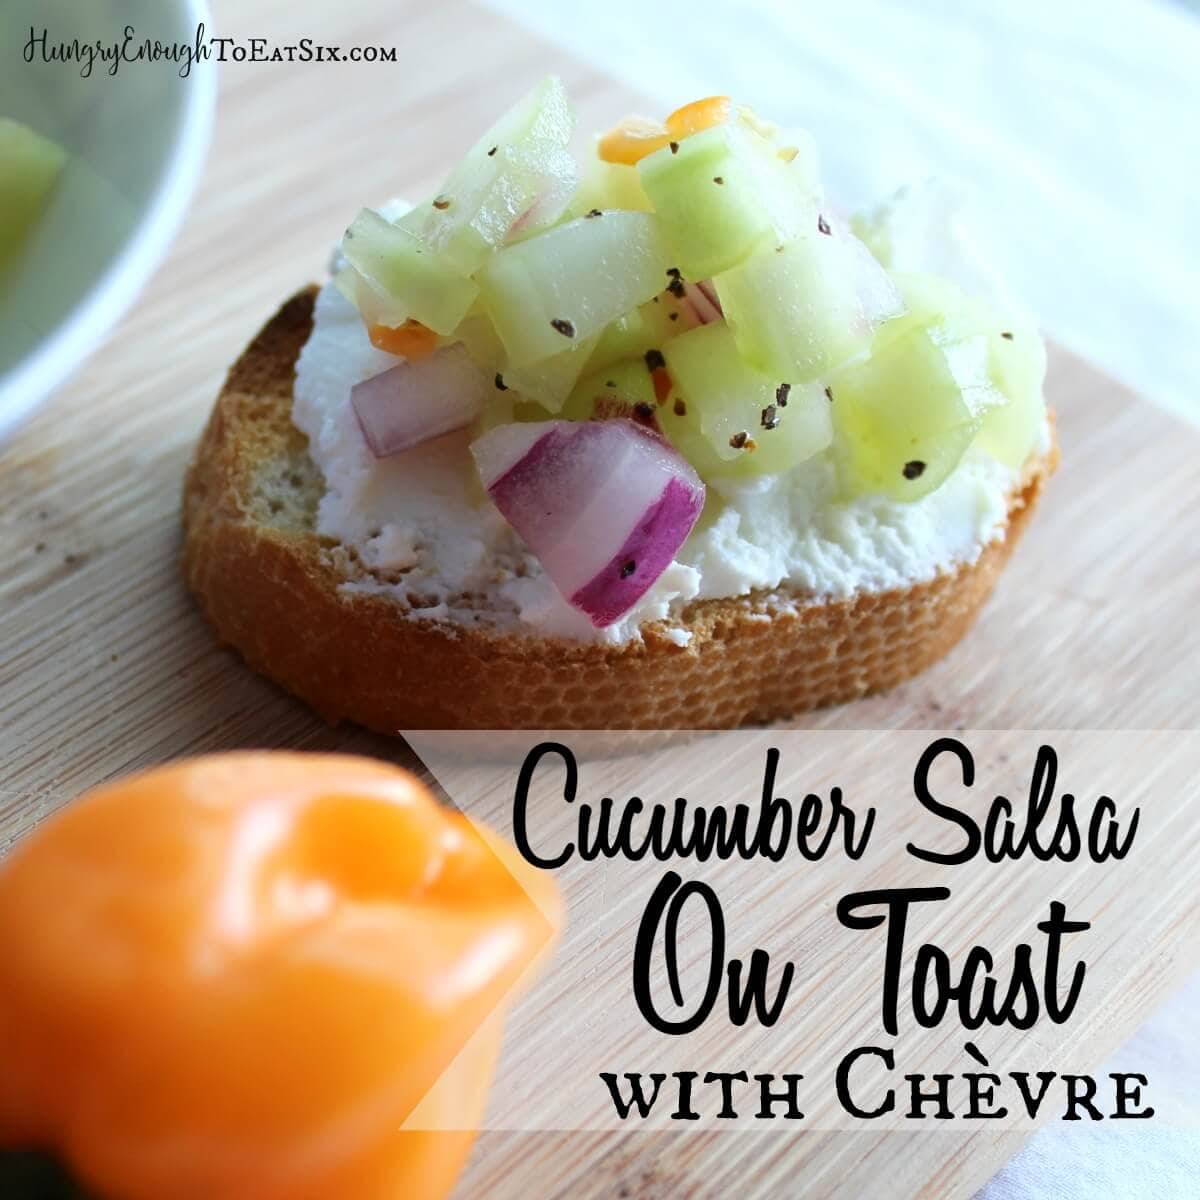 Vertical image of cucumber salsa-topped chevre toast on a cutting board, next to a pepper. With text overlay